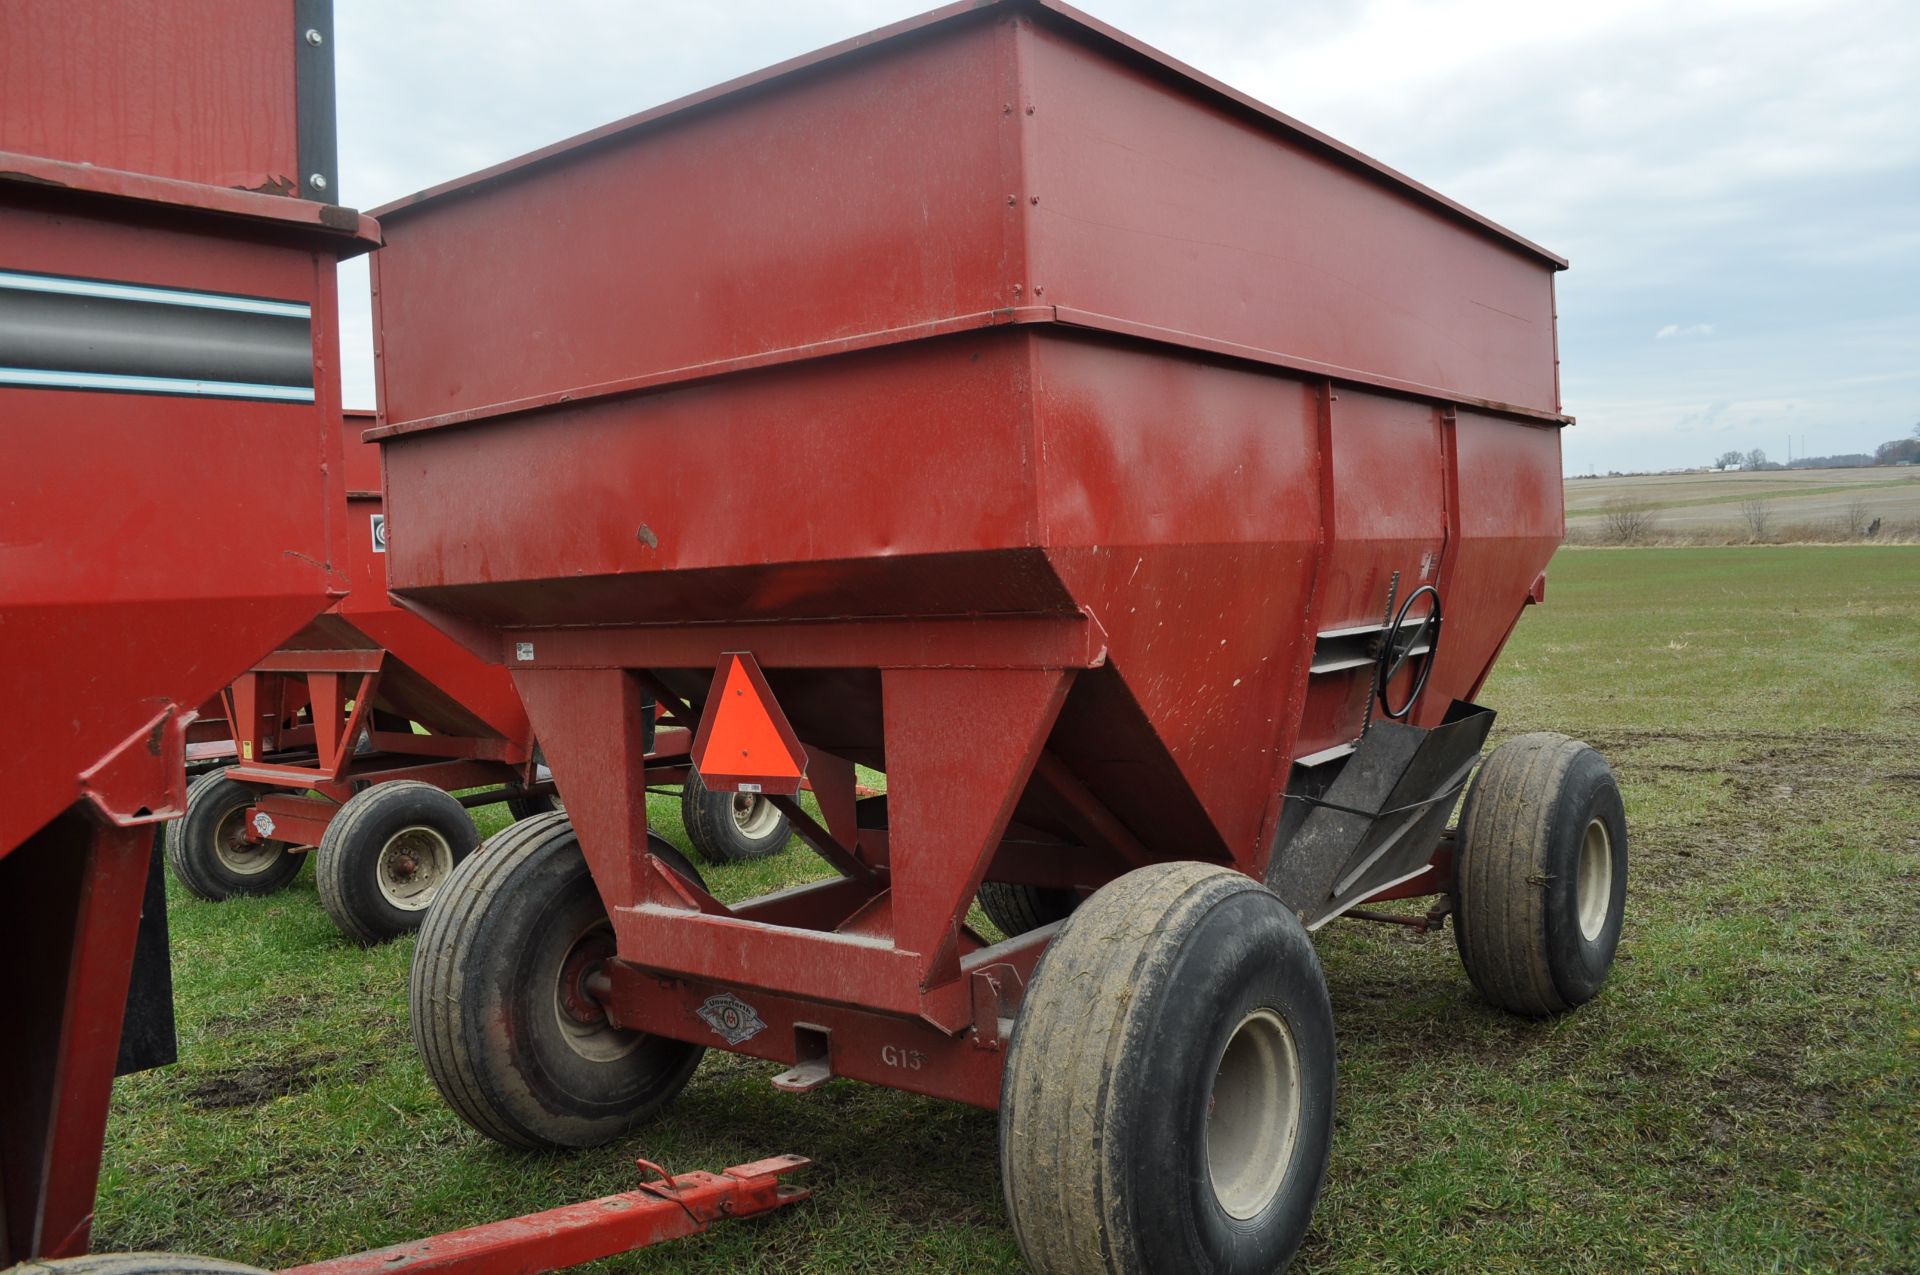 Unverferth 325 gravity bed wagon, 16.5 L 16 tires - Image 3 of 14